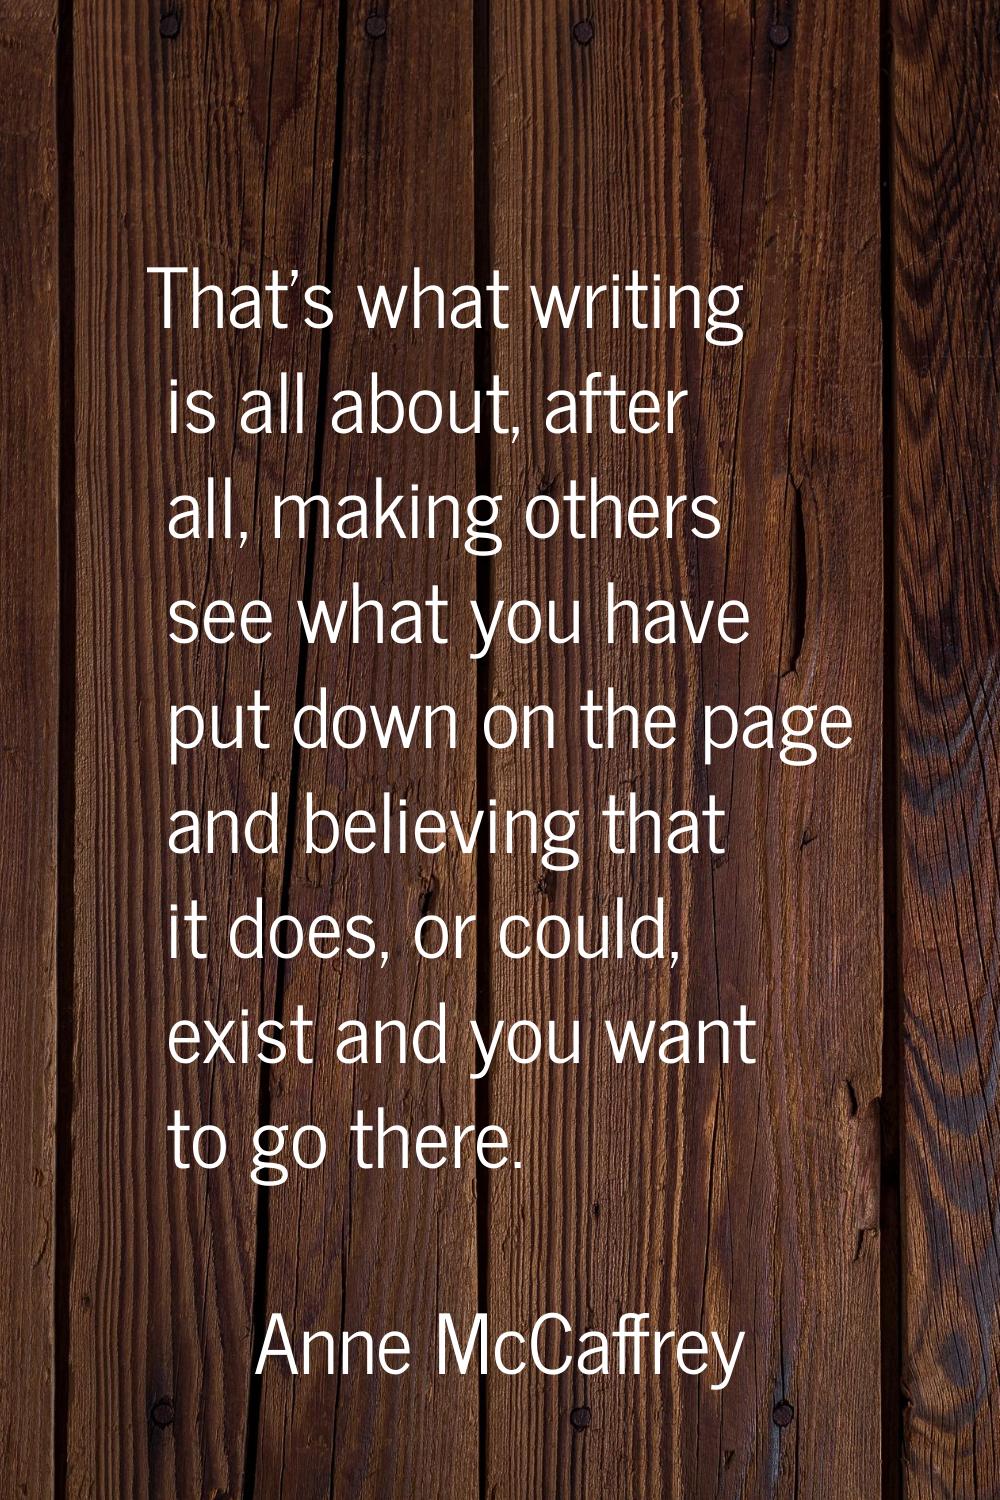 That's what writing is all about, after all, making others see what you have put down on the page a